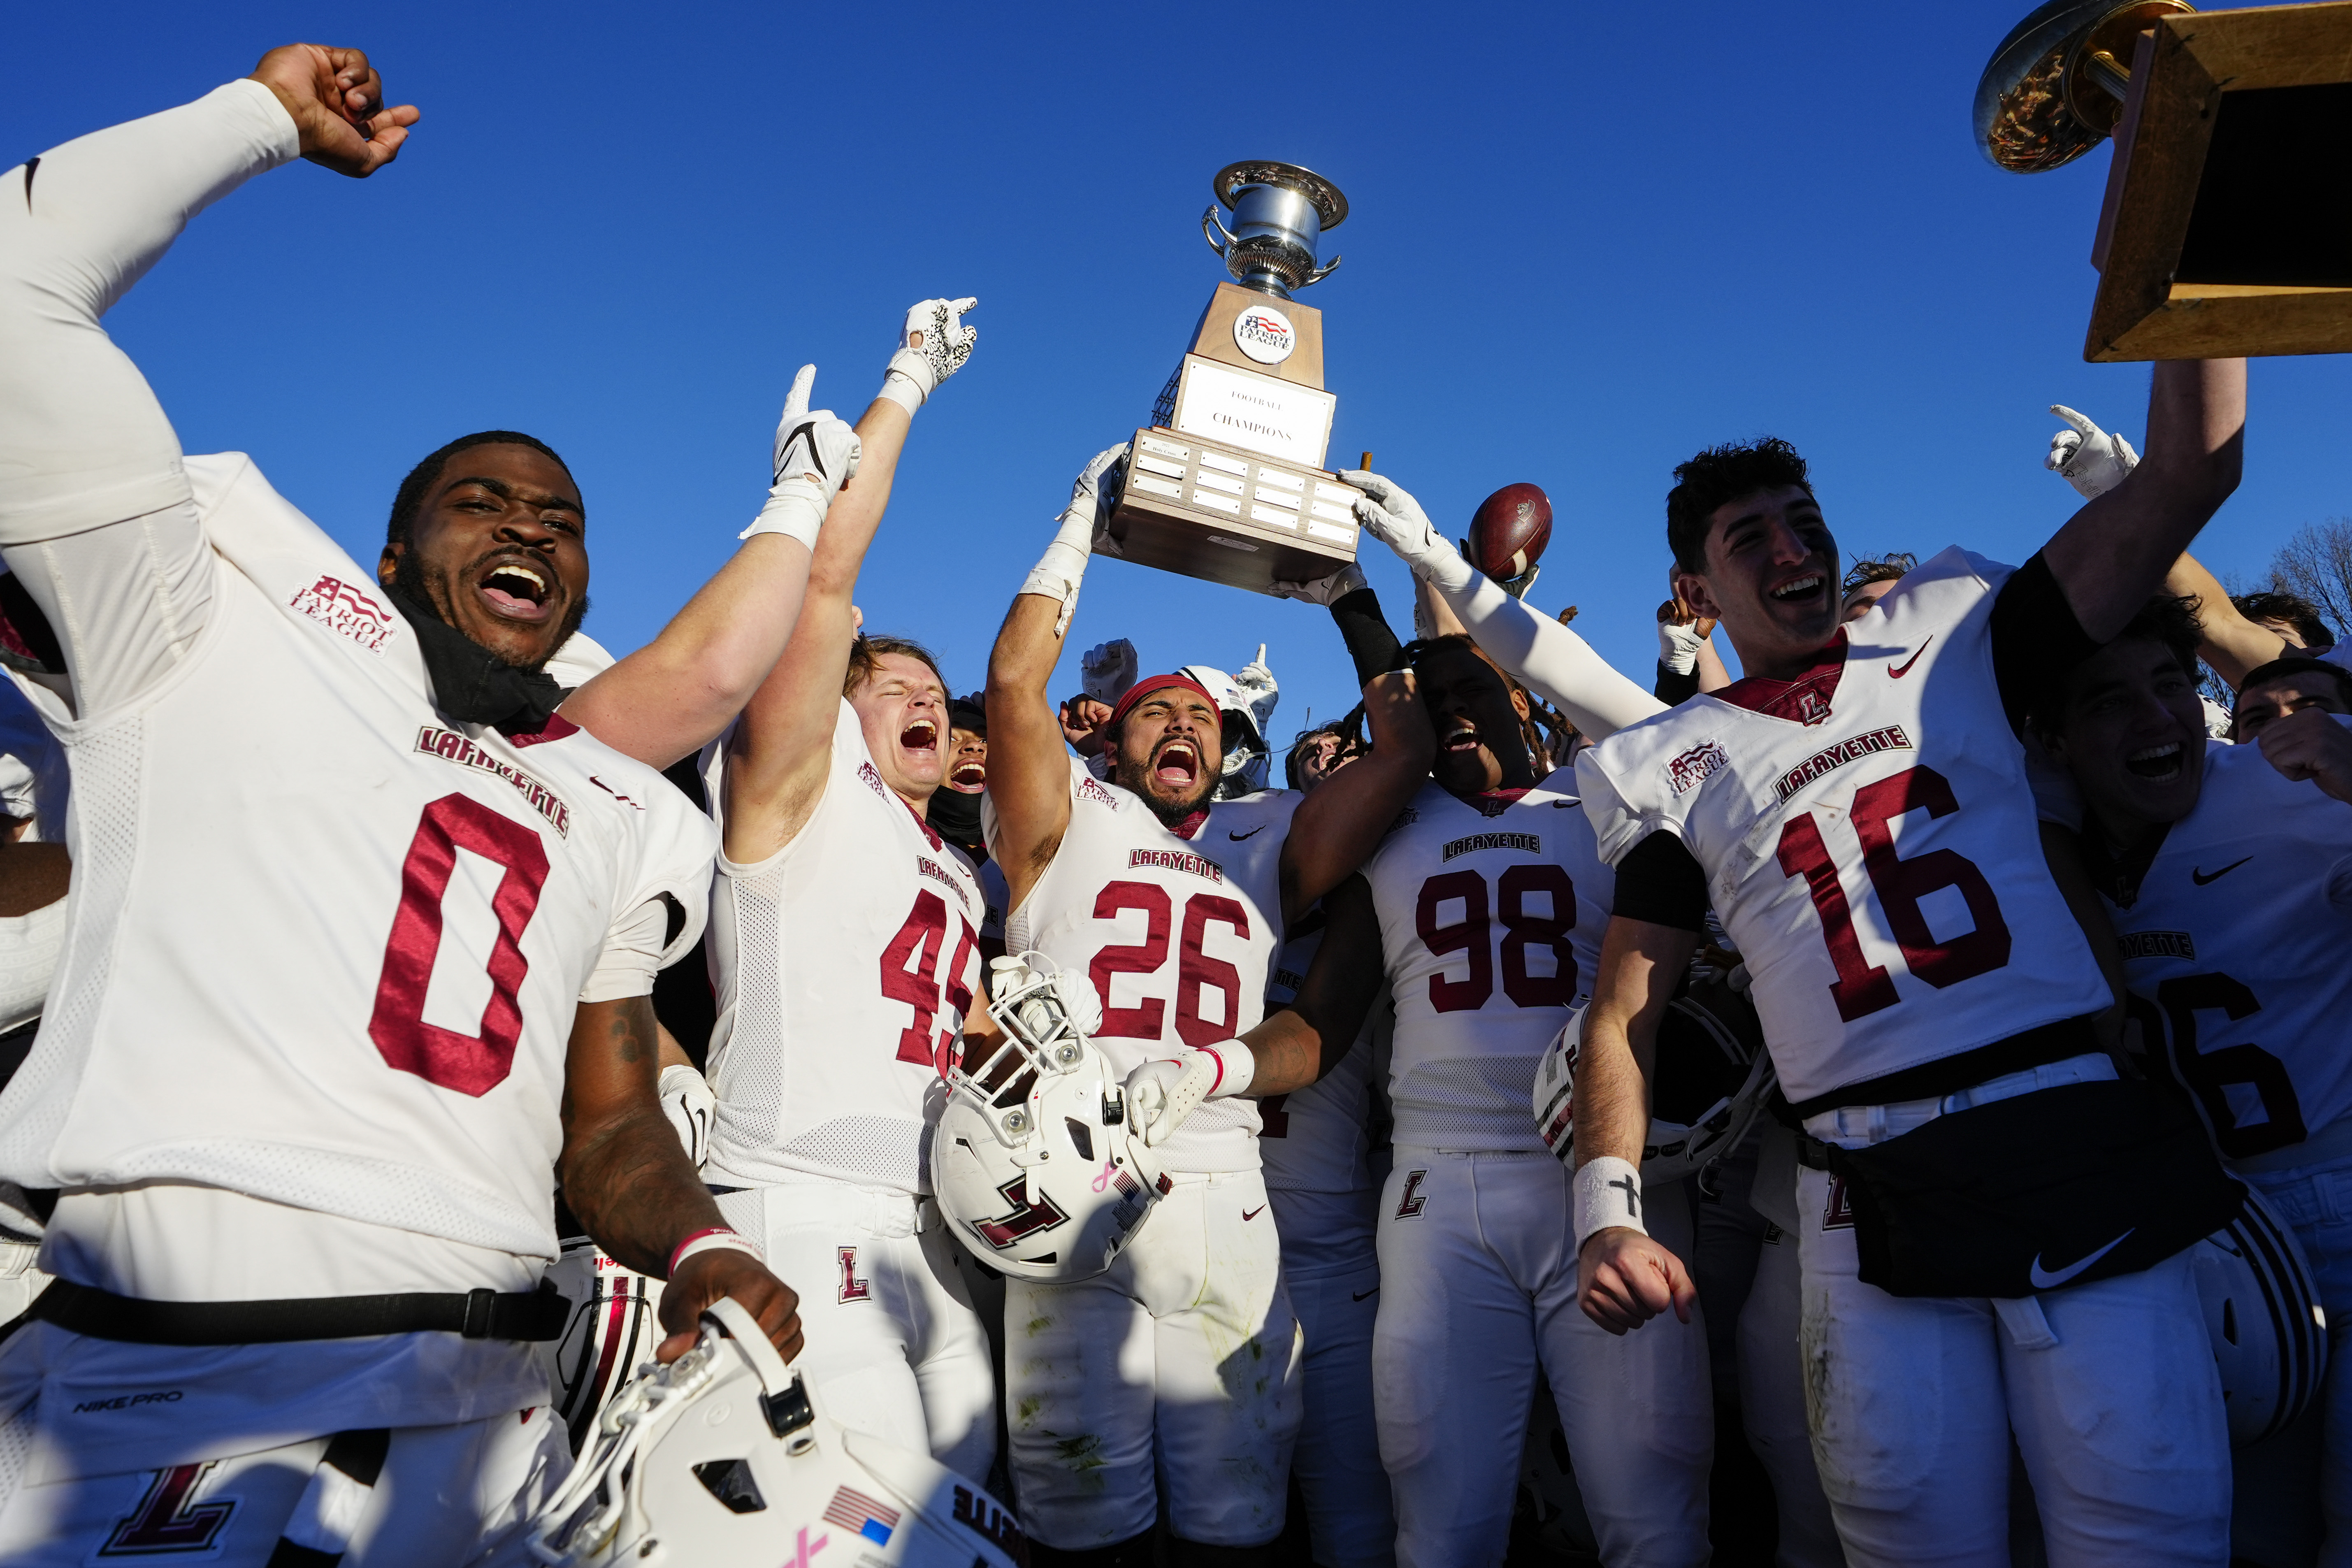 NCCU Eagles to Face Richmond Spiders in First Round of NCAA FCS Playoffs -  Mid-Eastern Athletic Conference